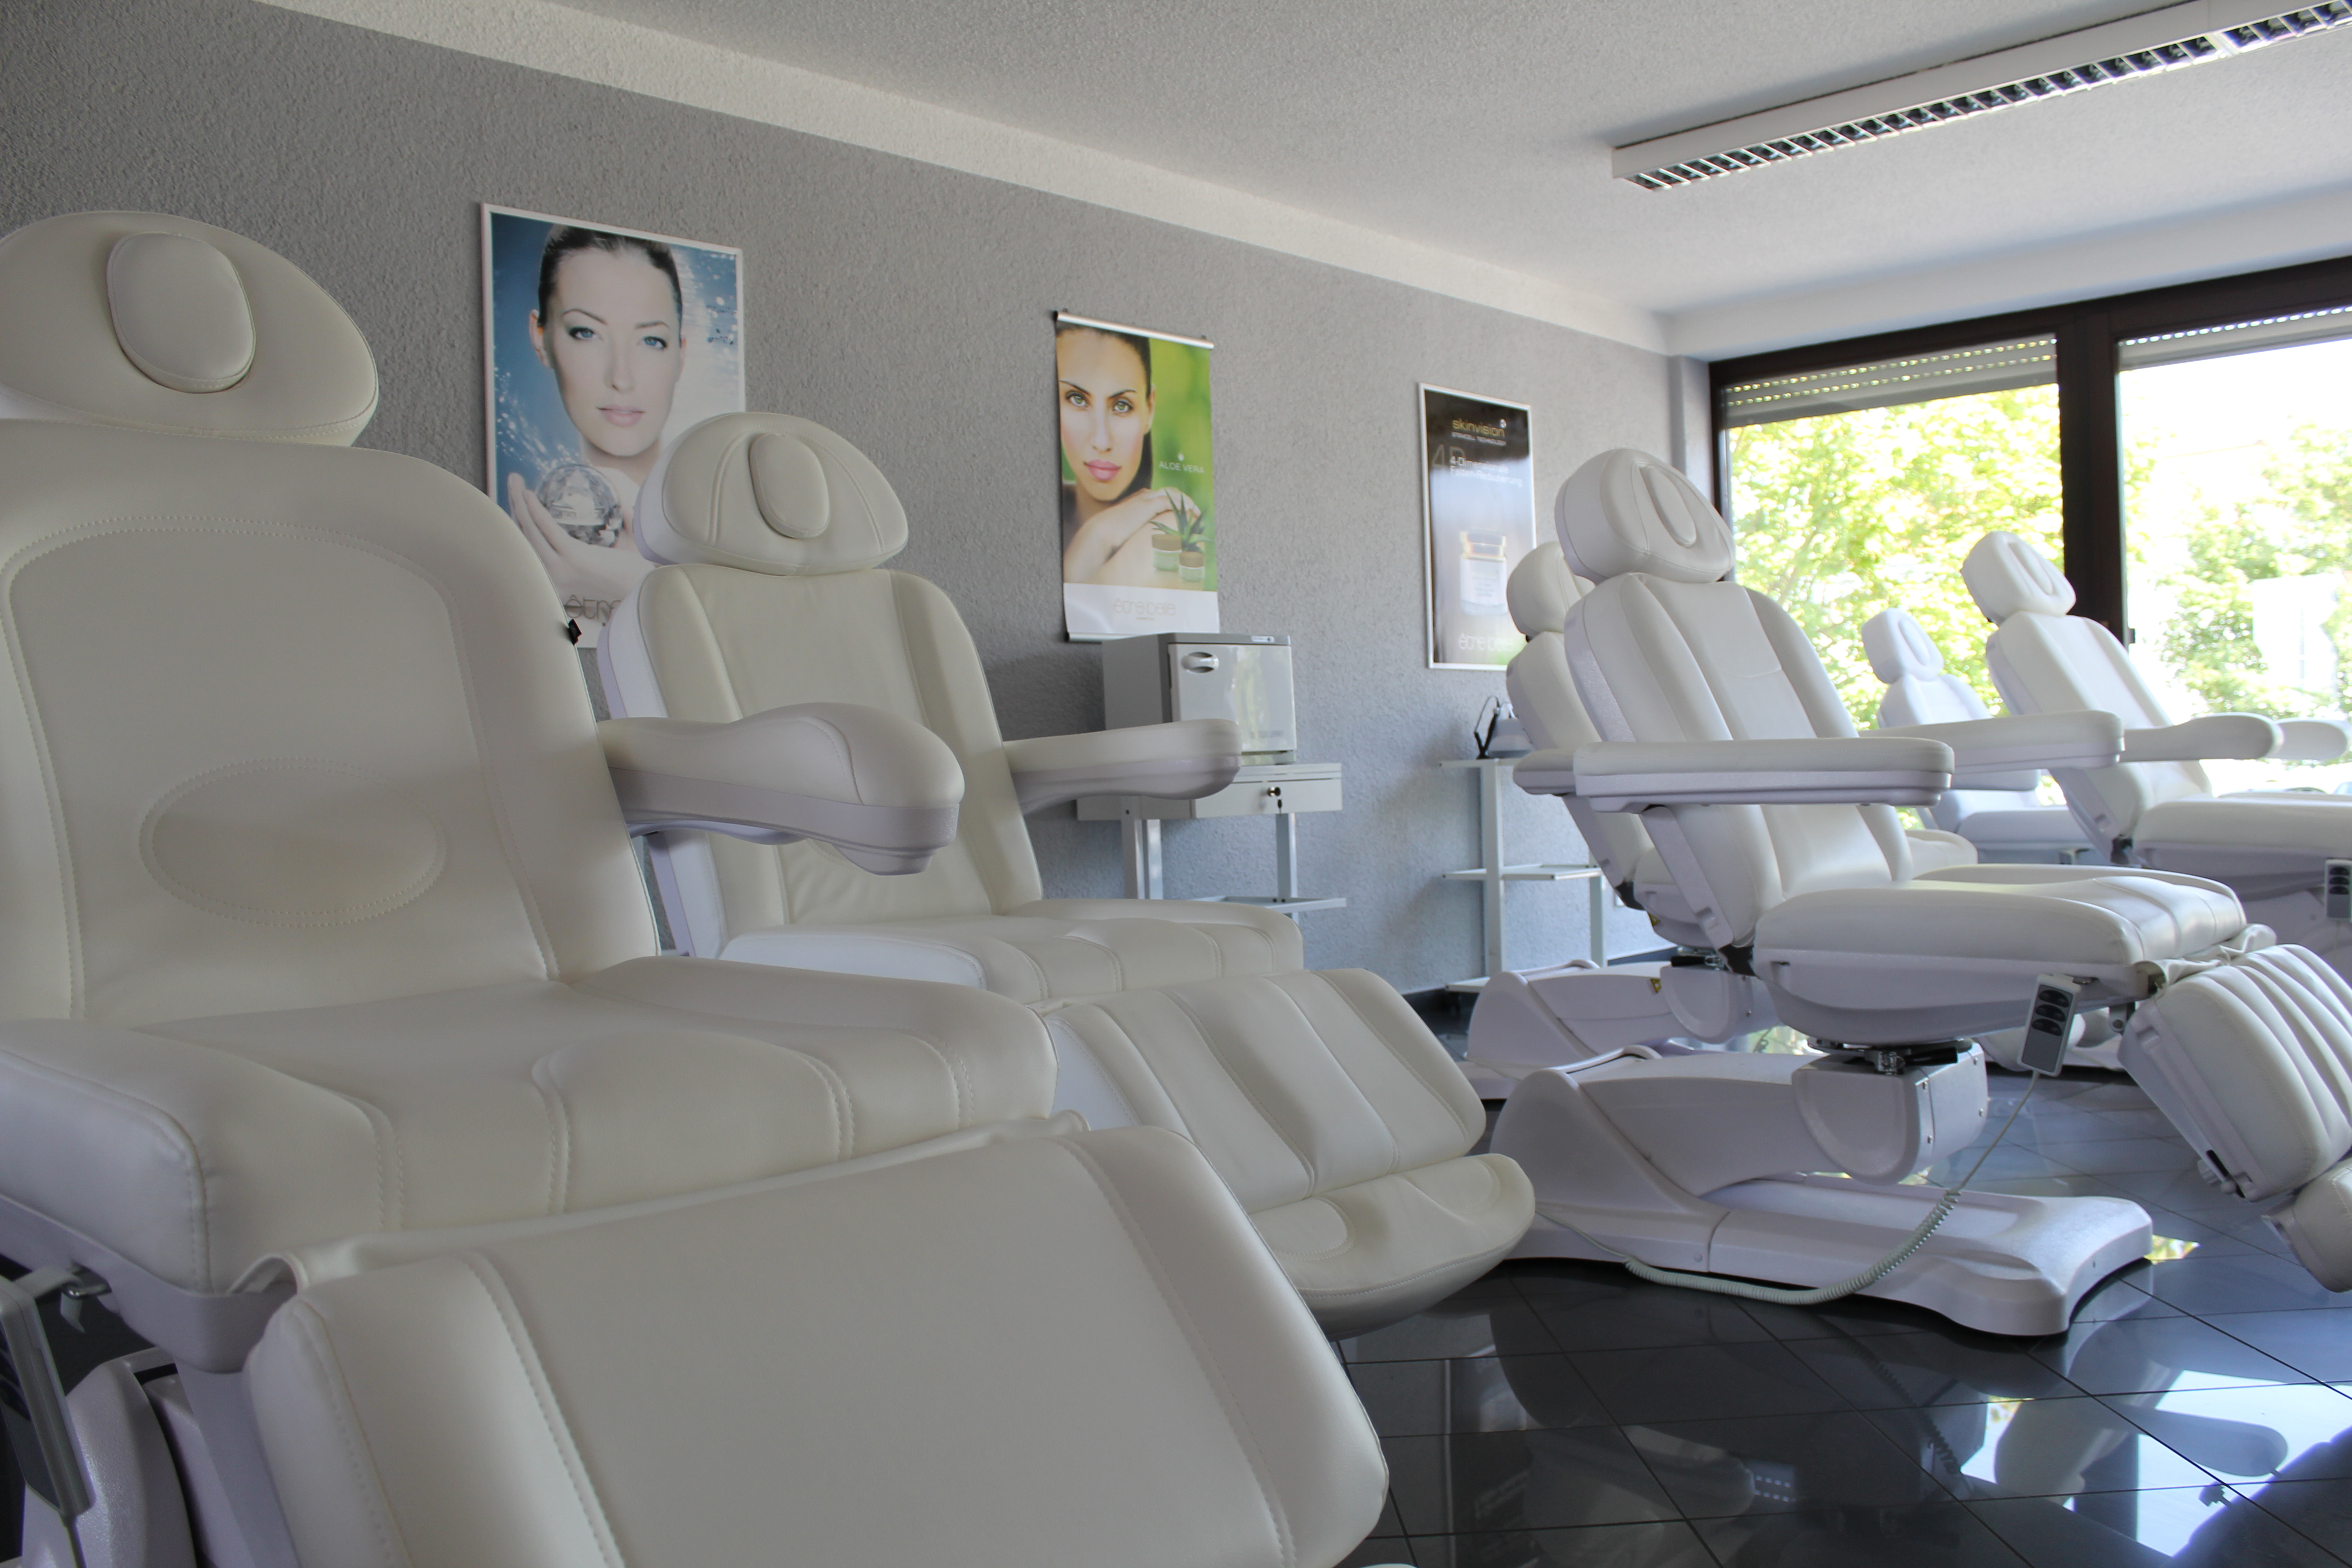 Cosmetica Hannover